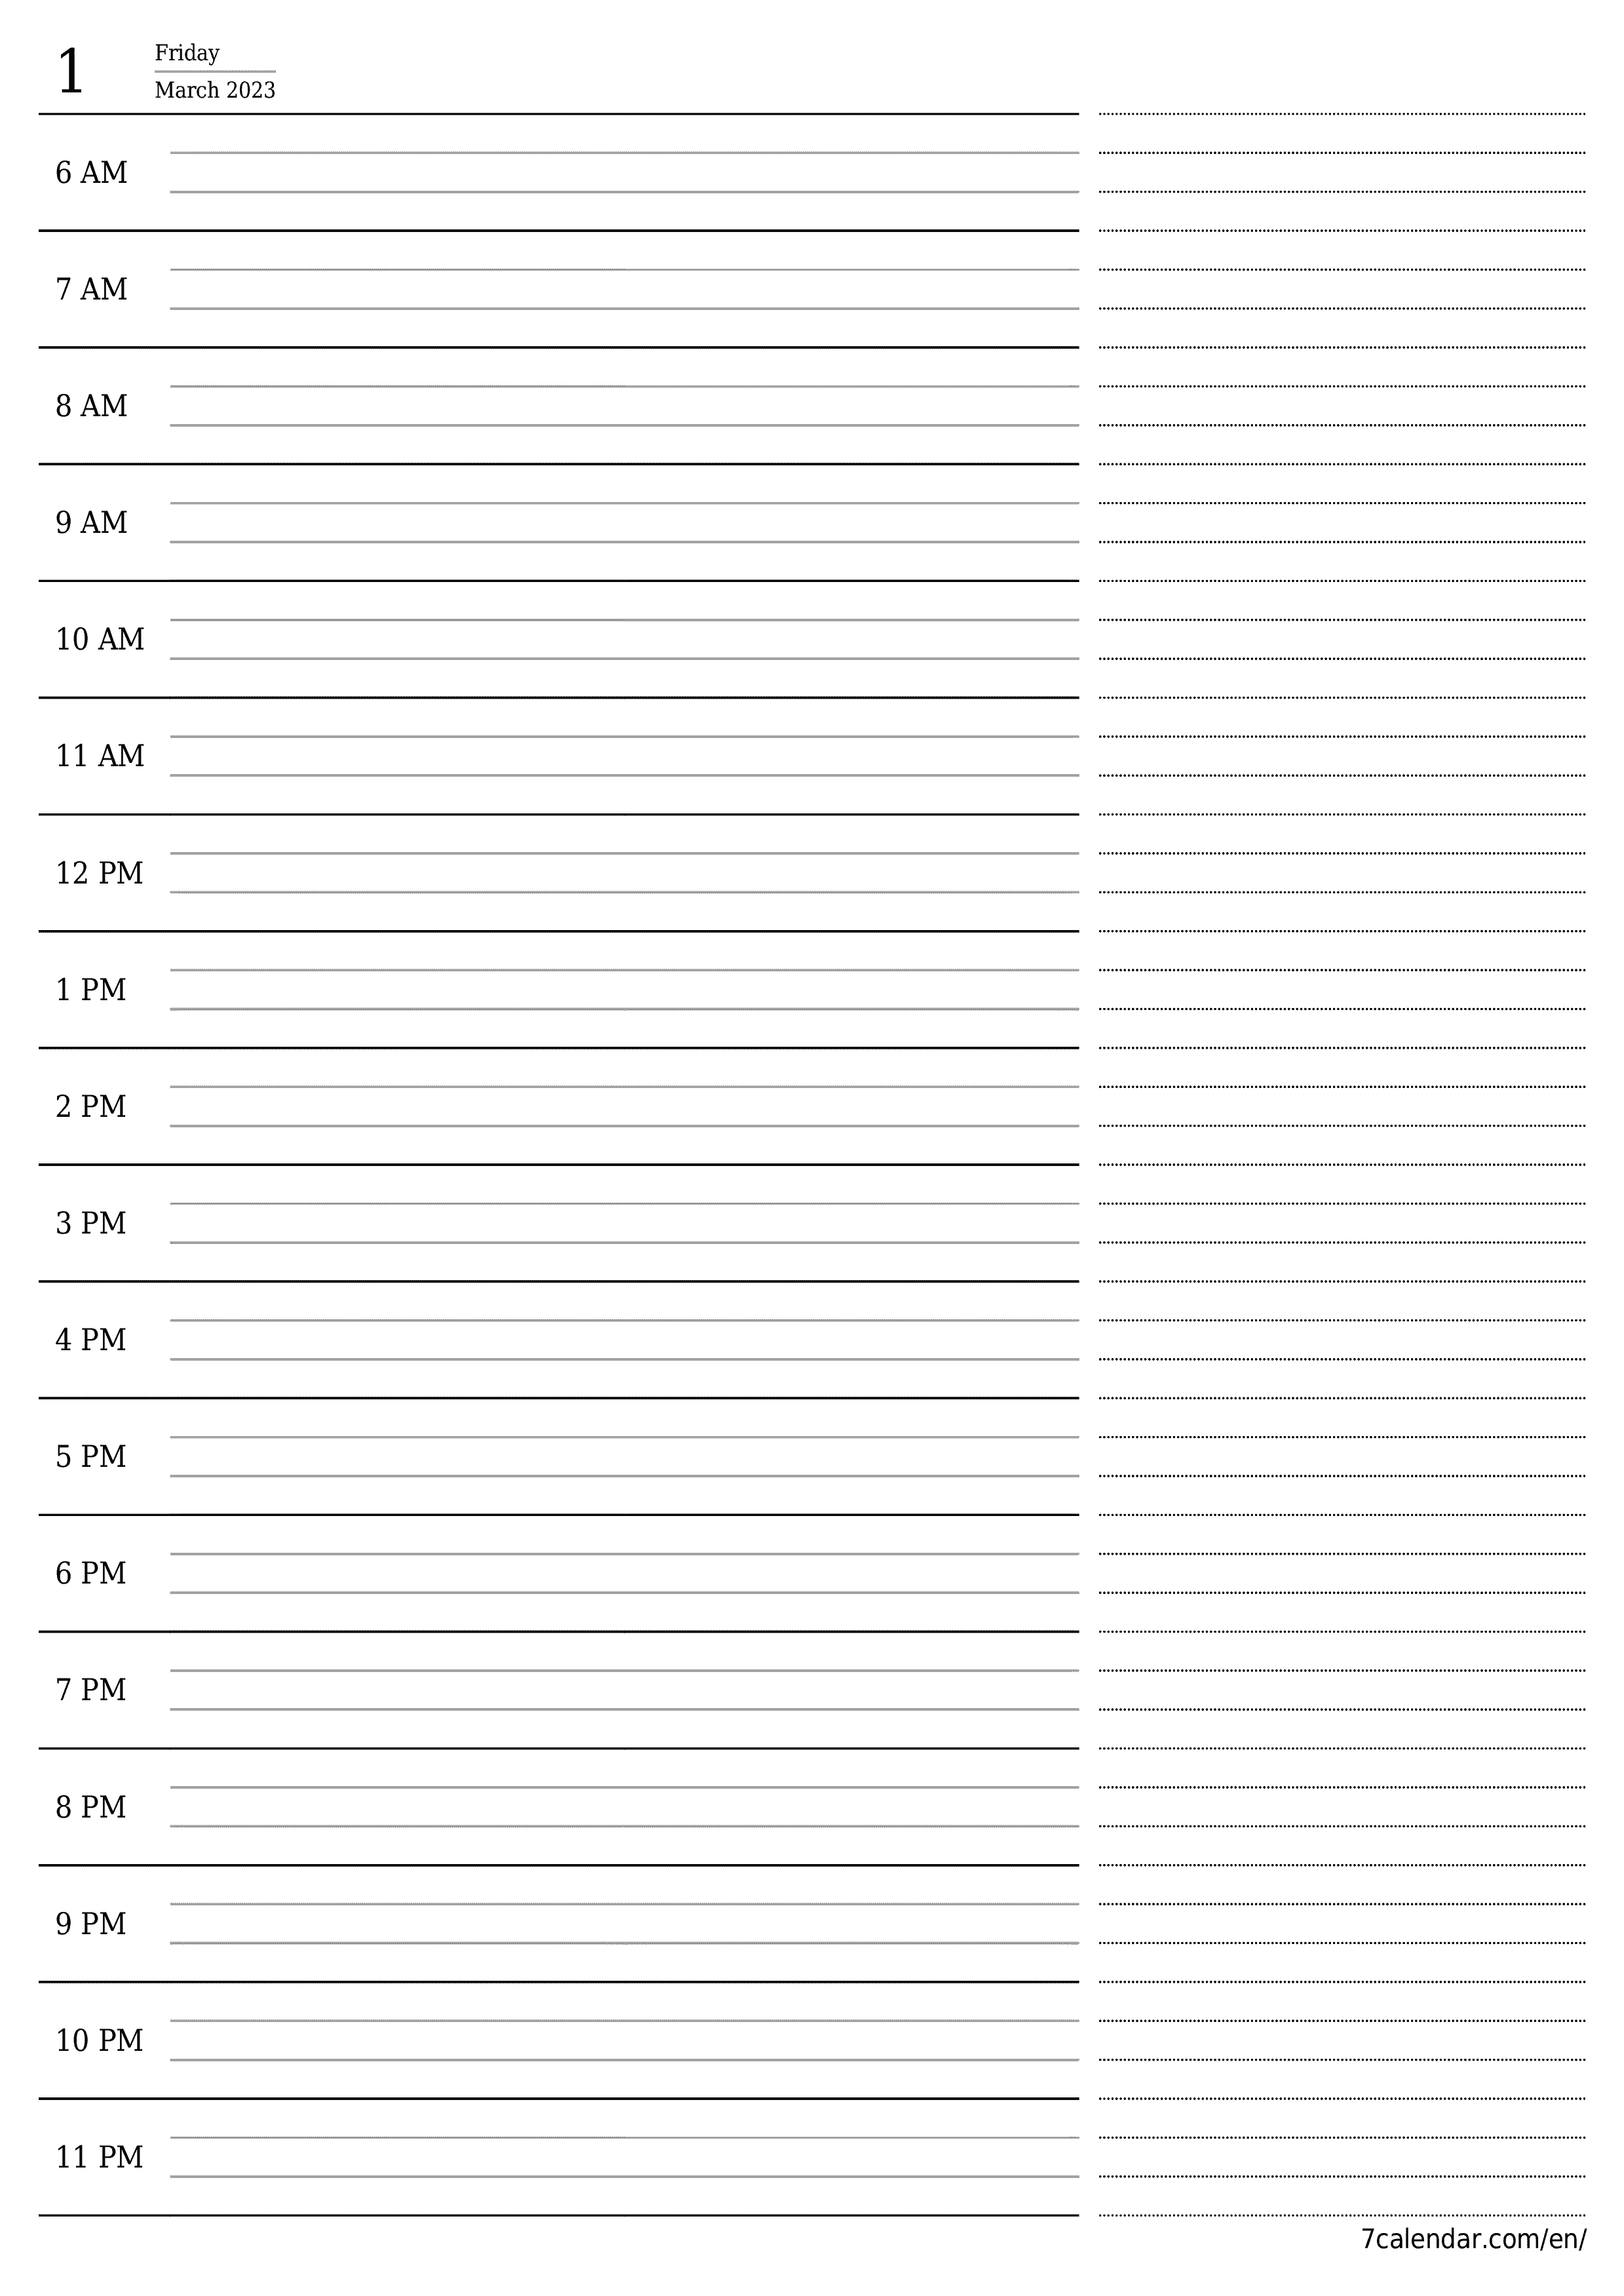 Blank daily printable calendar and planner for day March 2023 with notes, save and print to PDF PNG English - 7calendar.com